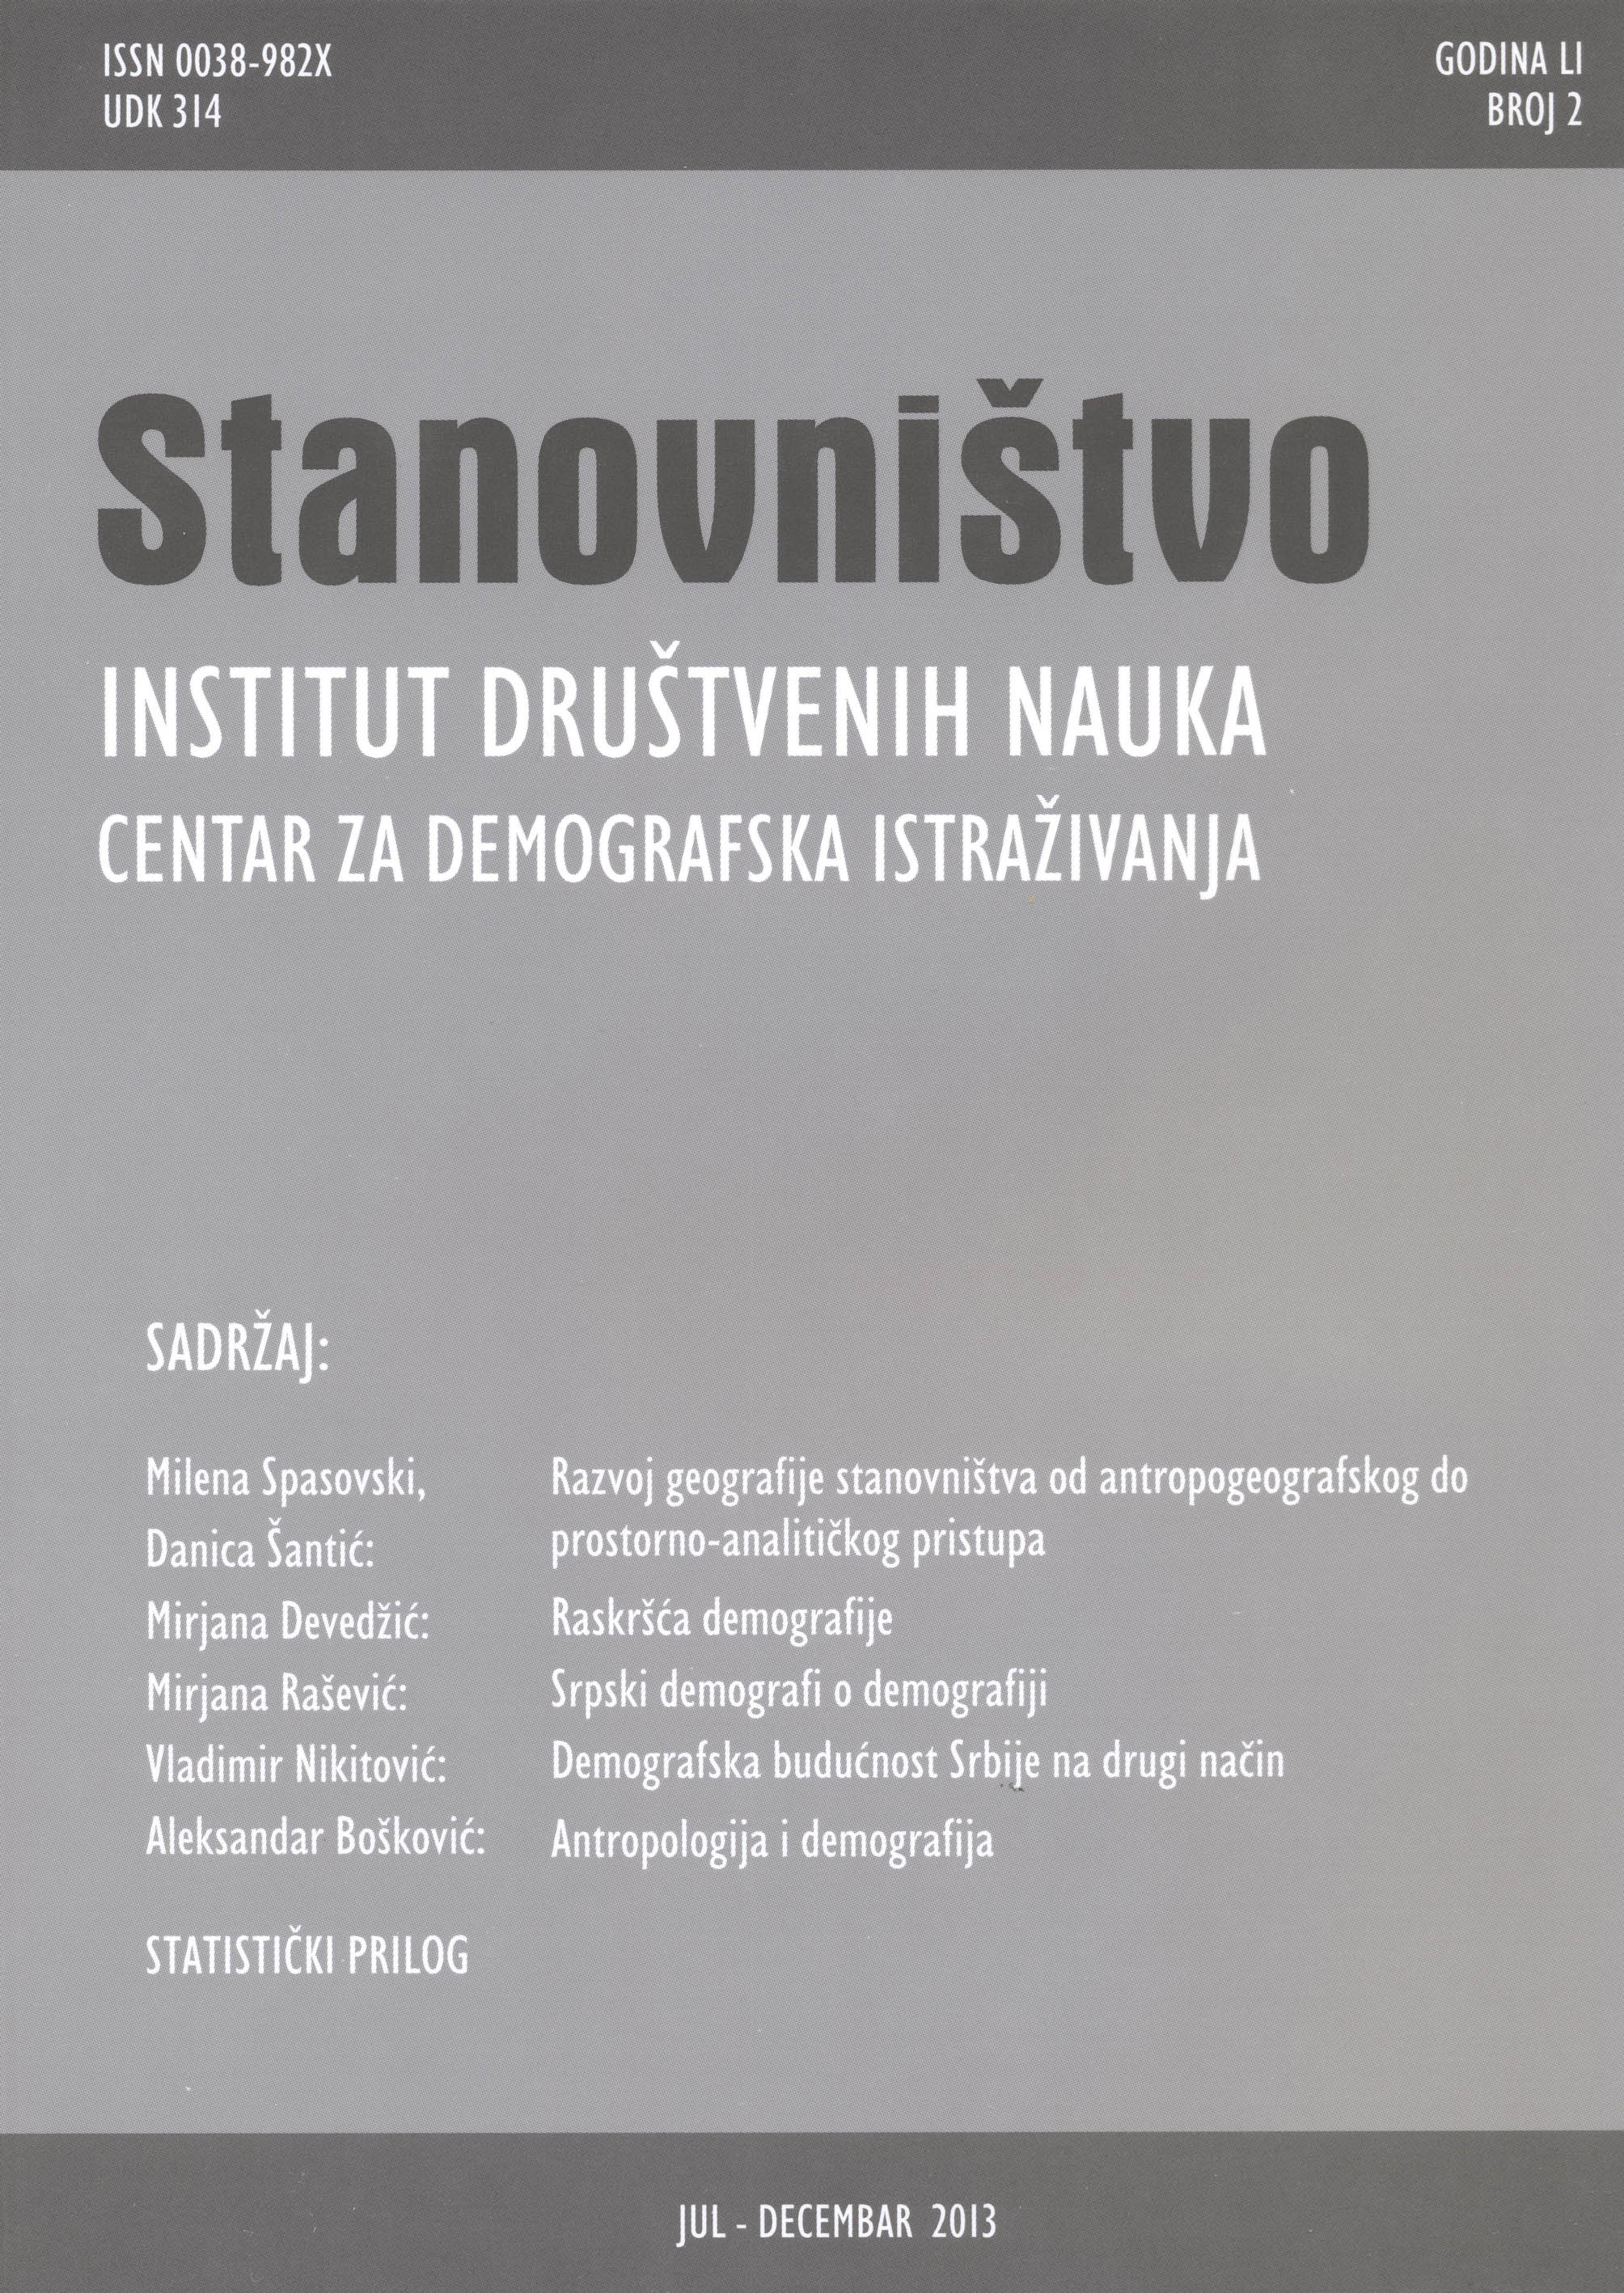 					View Vol. 51 No. 2 (2013): Jubilee issue - 50 years of the journal Stanovništvo
				